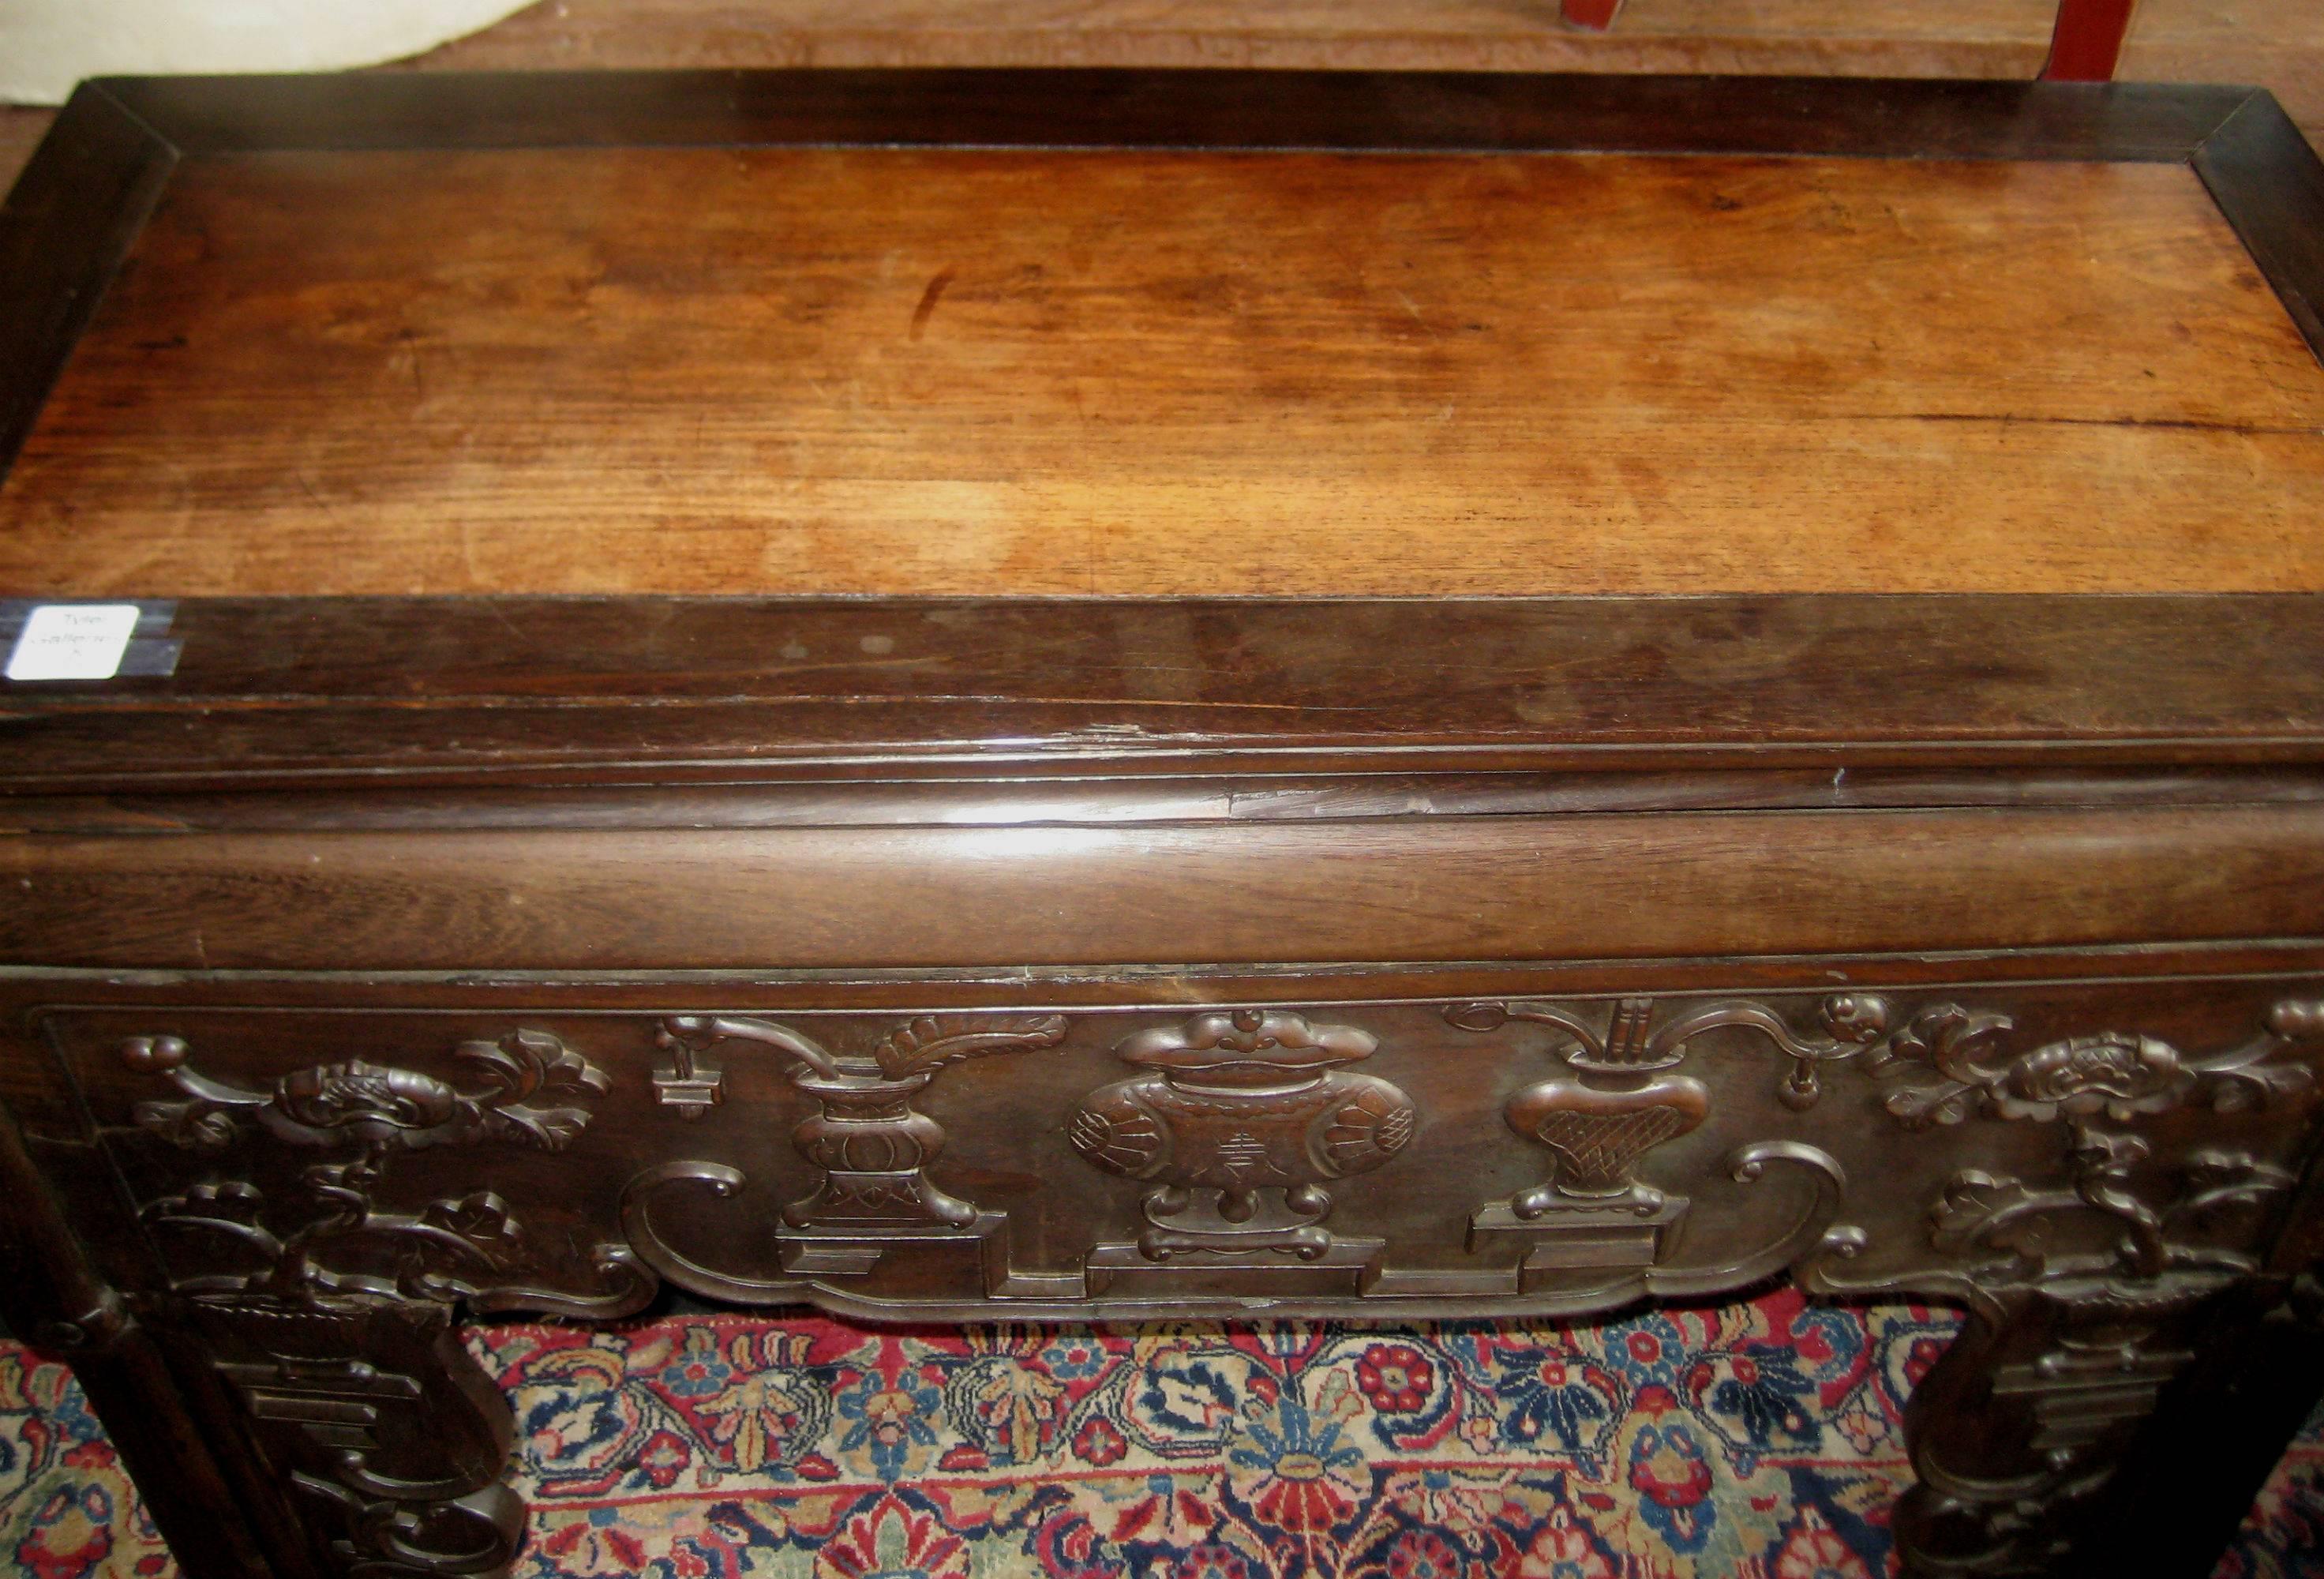 Chinese Export 19th Century Chinese Carved Hardwood Console or Alter Table